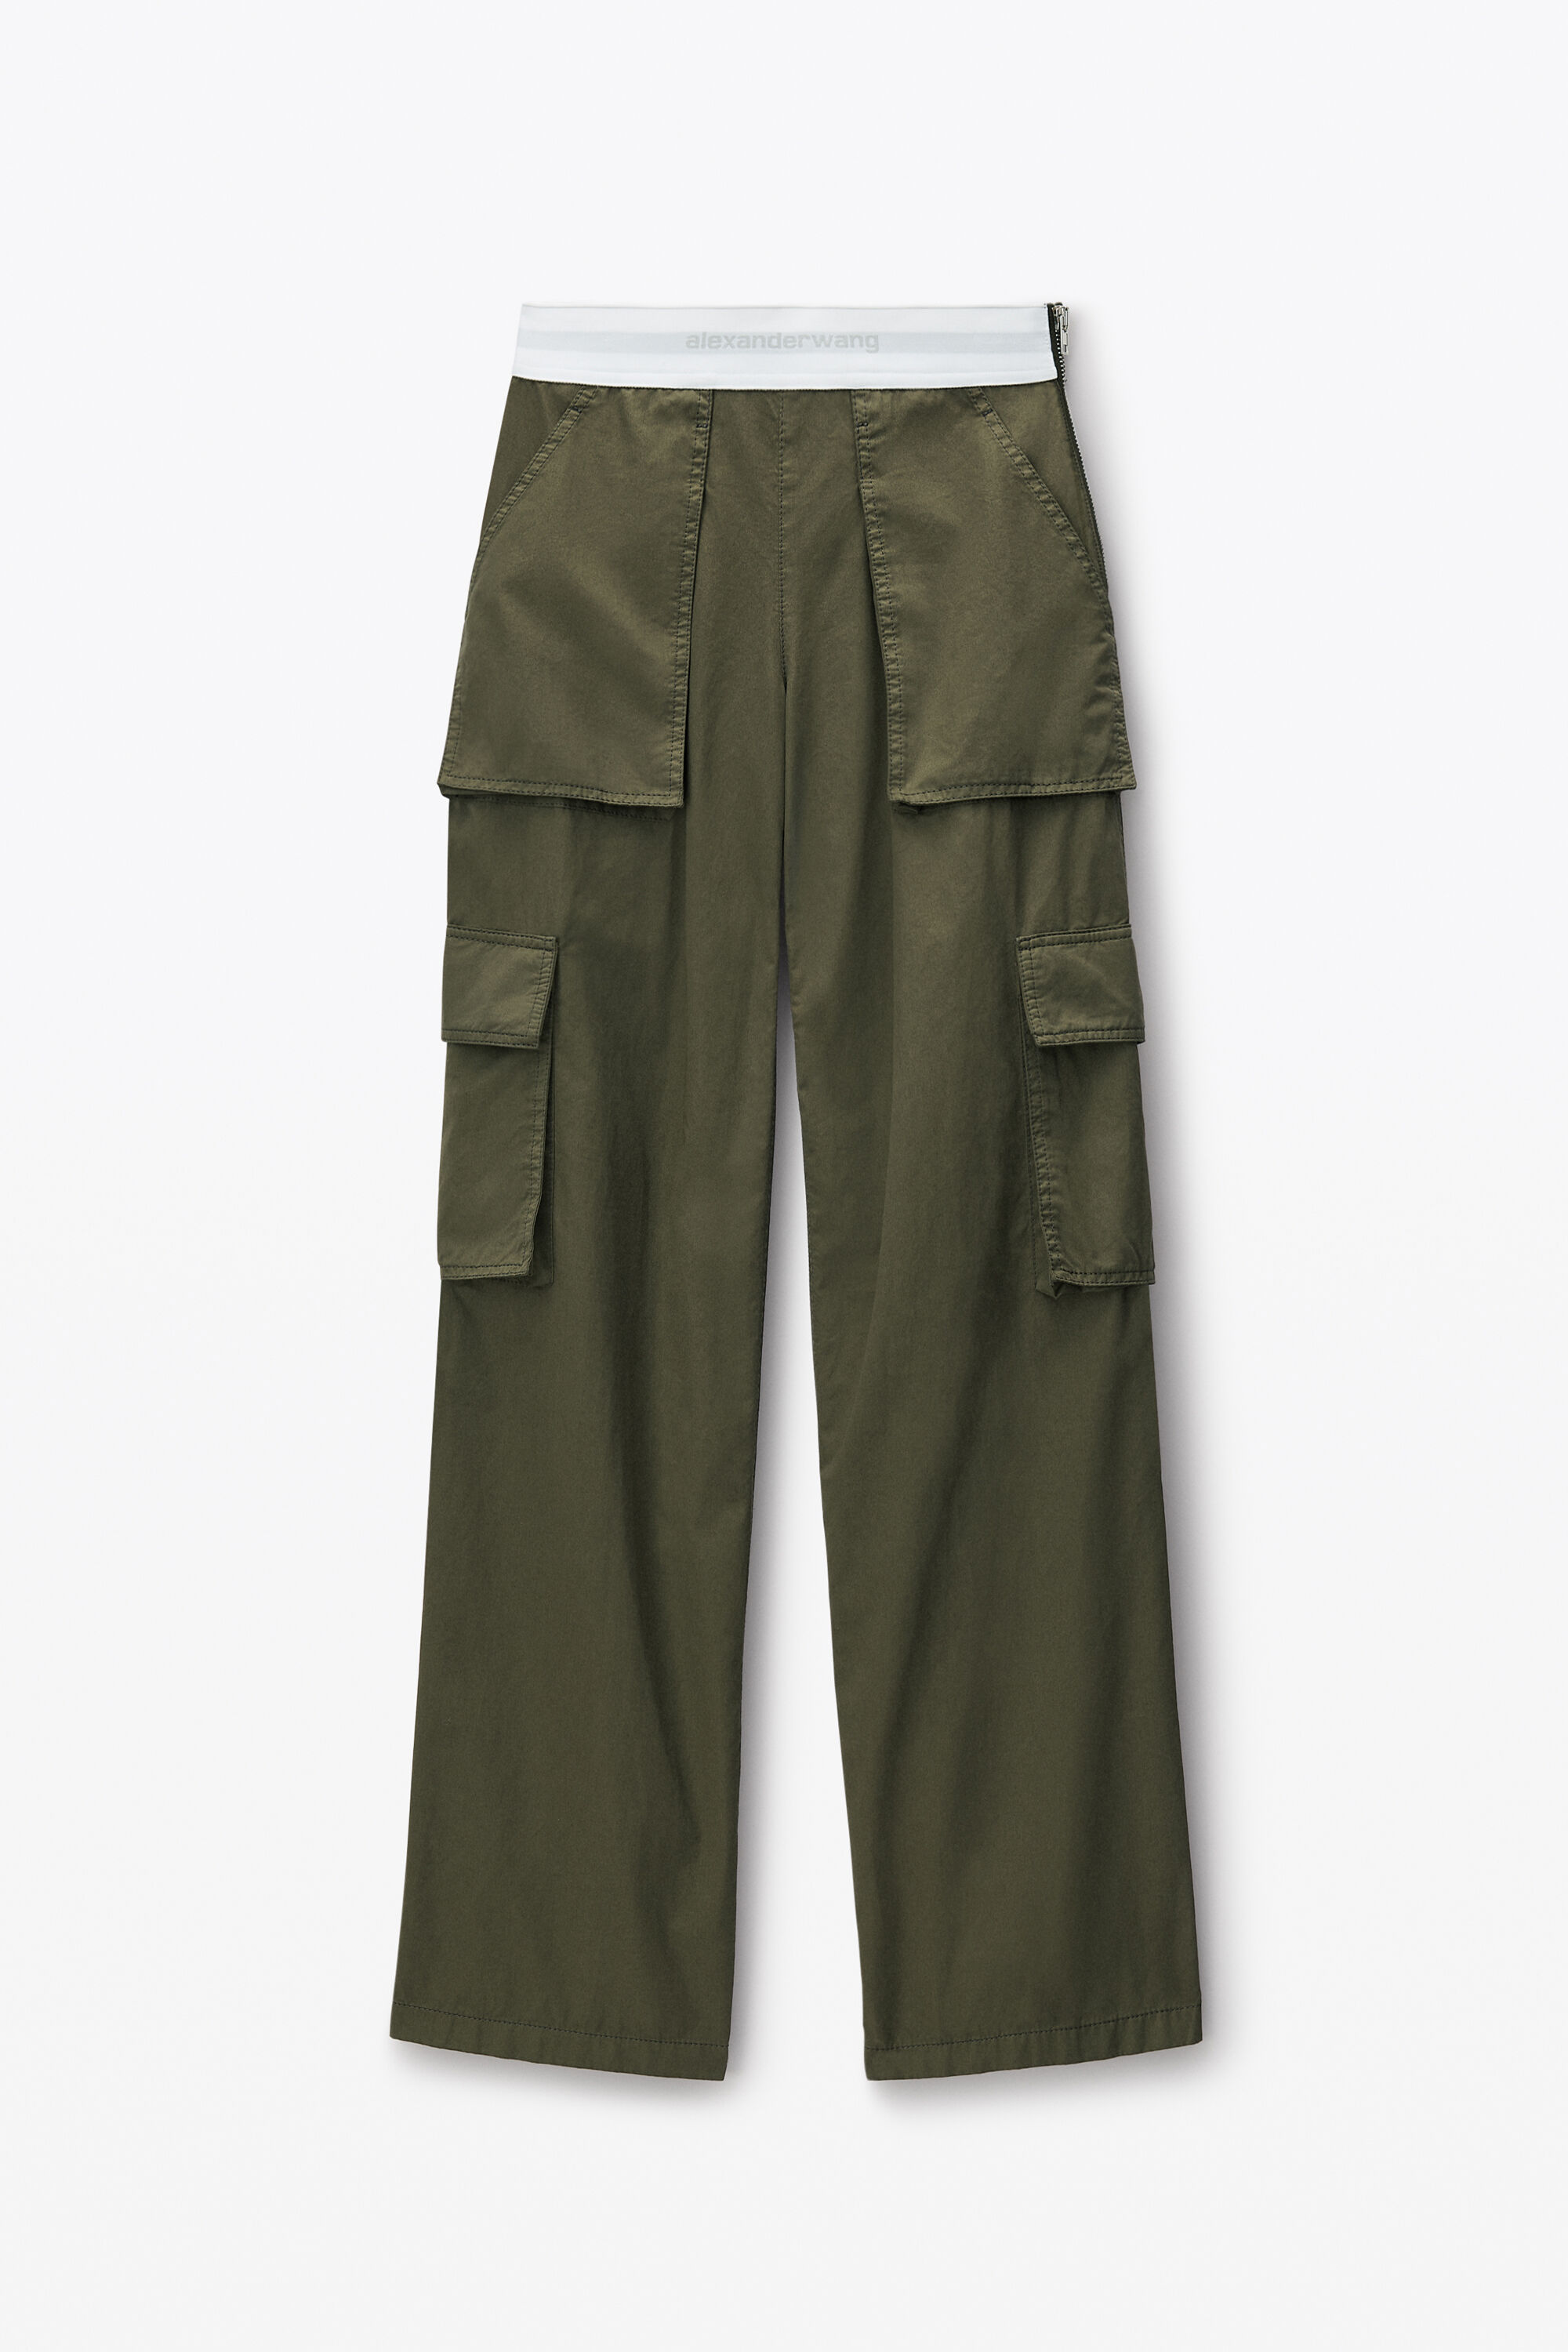 mid-rise cargo rave pants in cotton twill in ARMY GREEN 